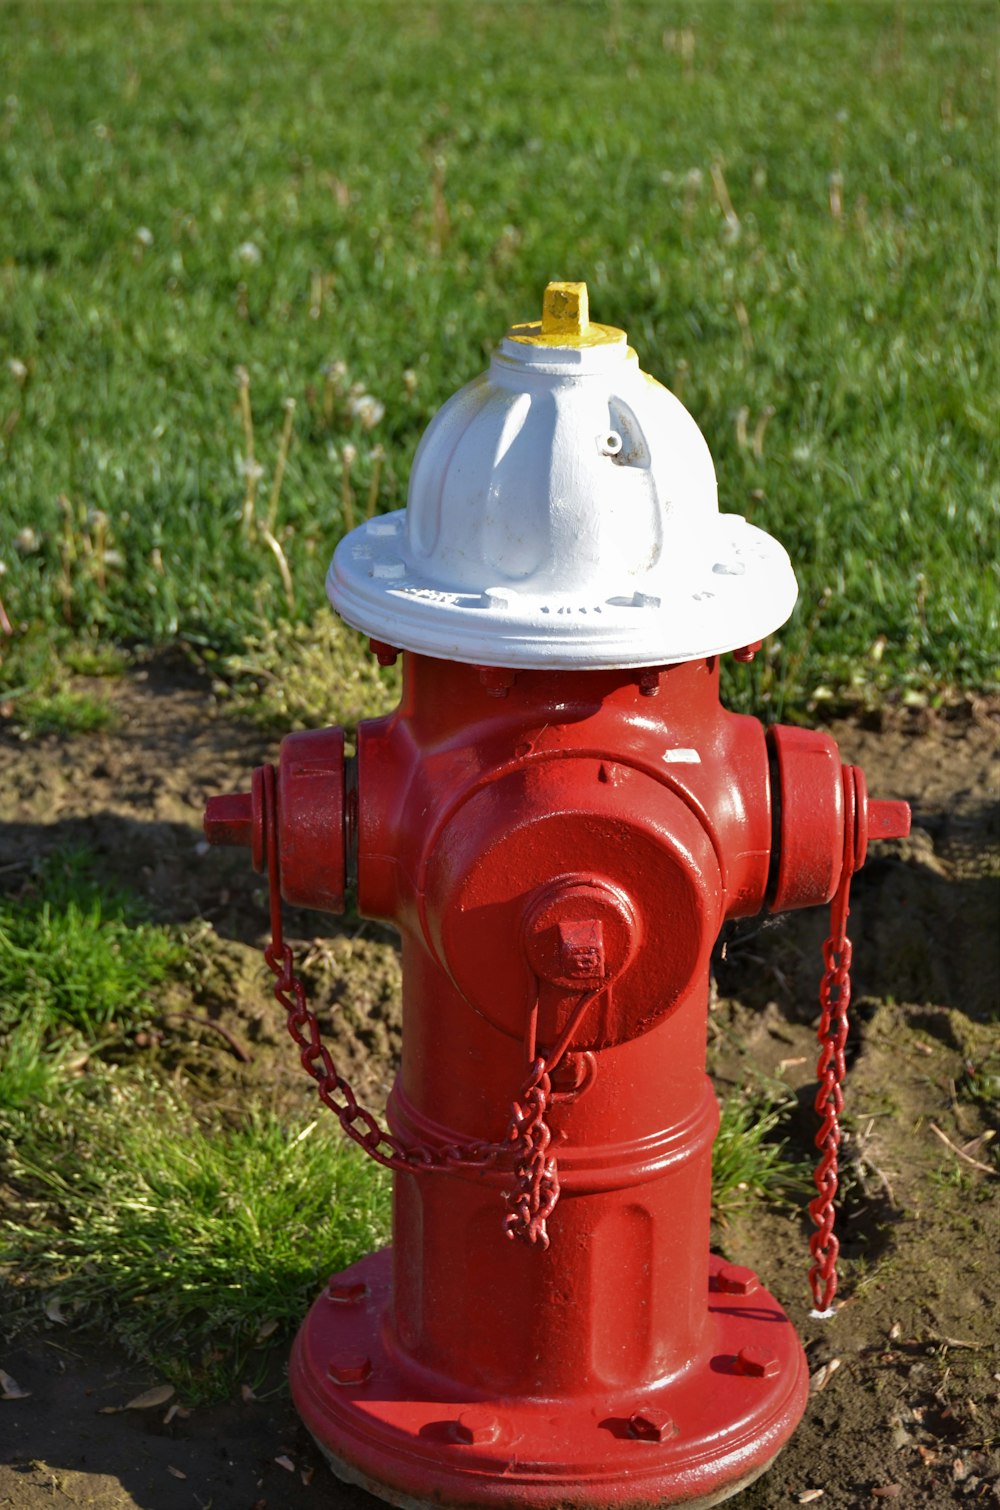 red fire hydrant on green grass field during daytime